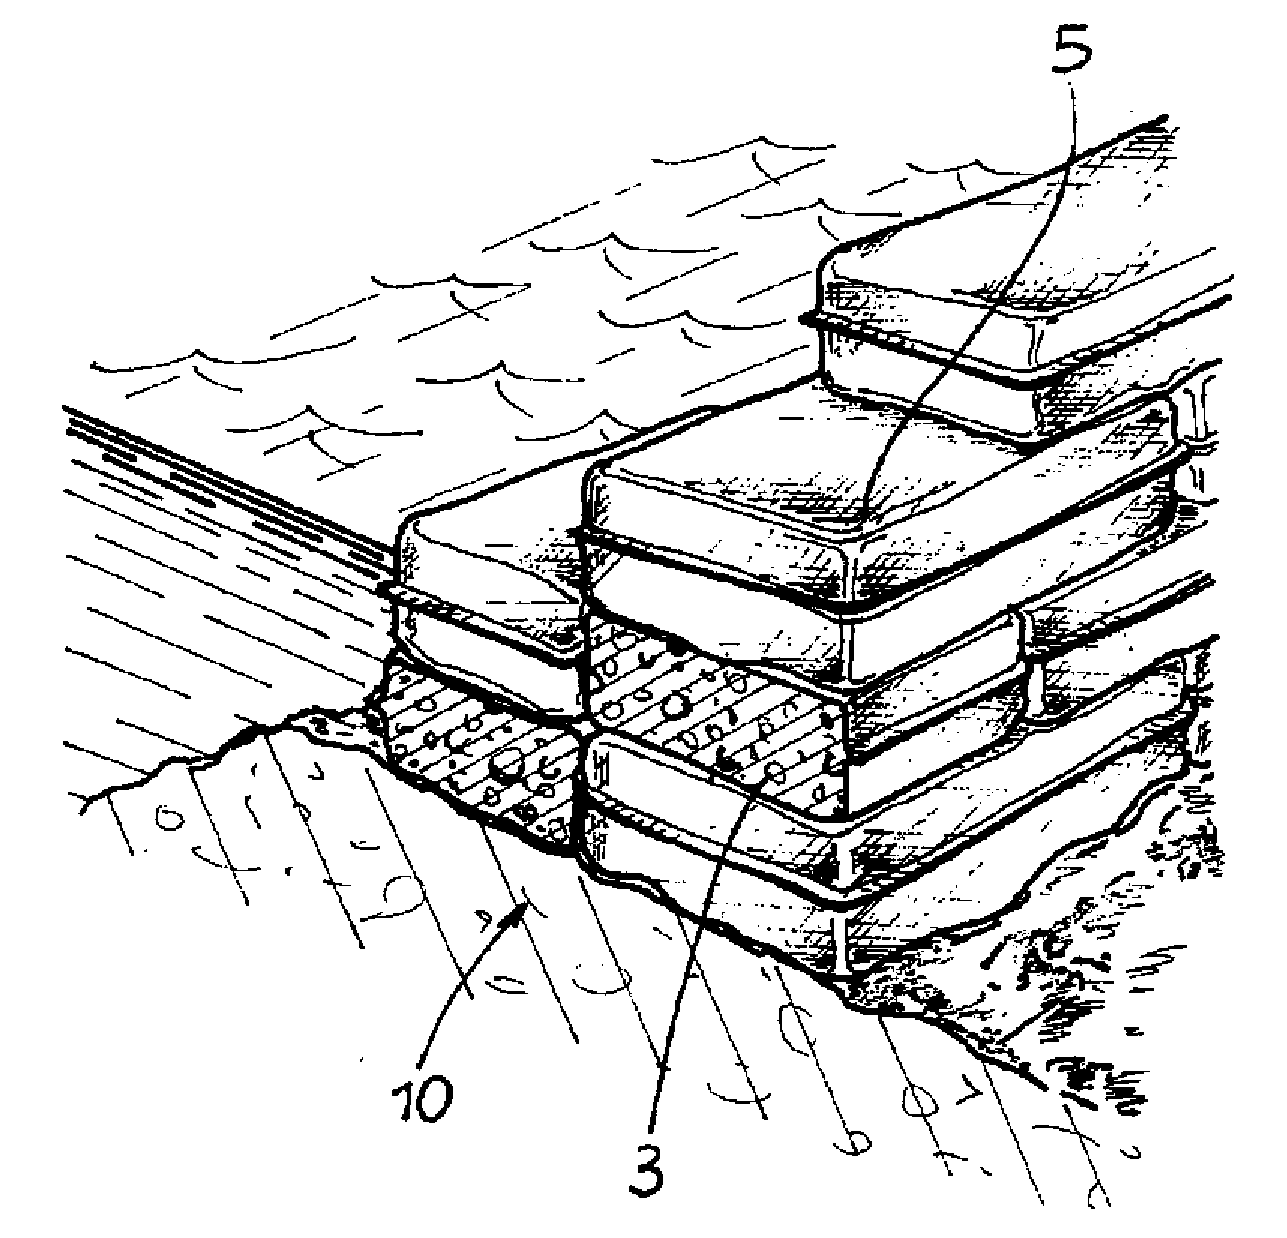 Expansion Device For Containing Overflows